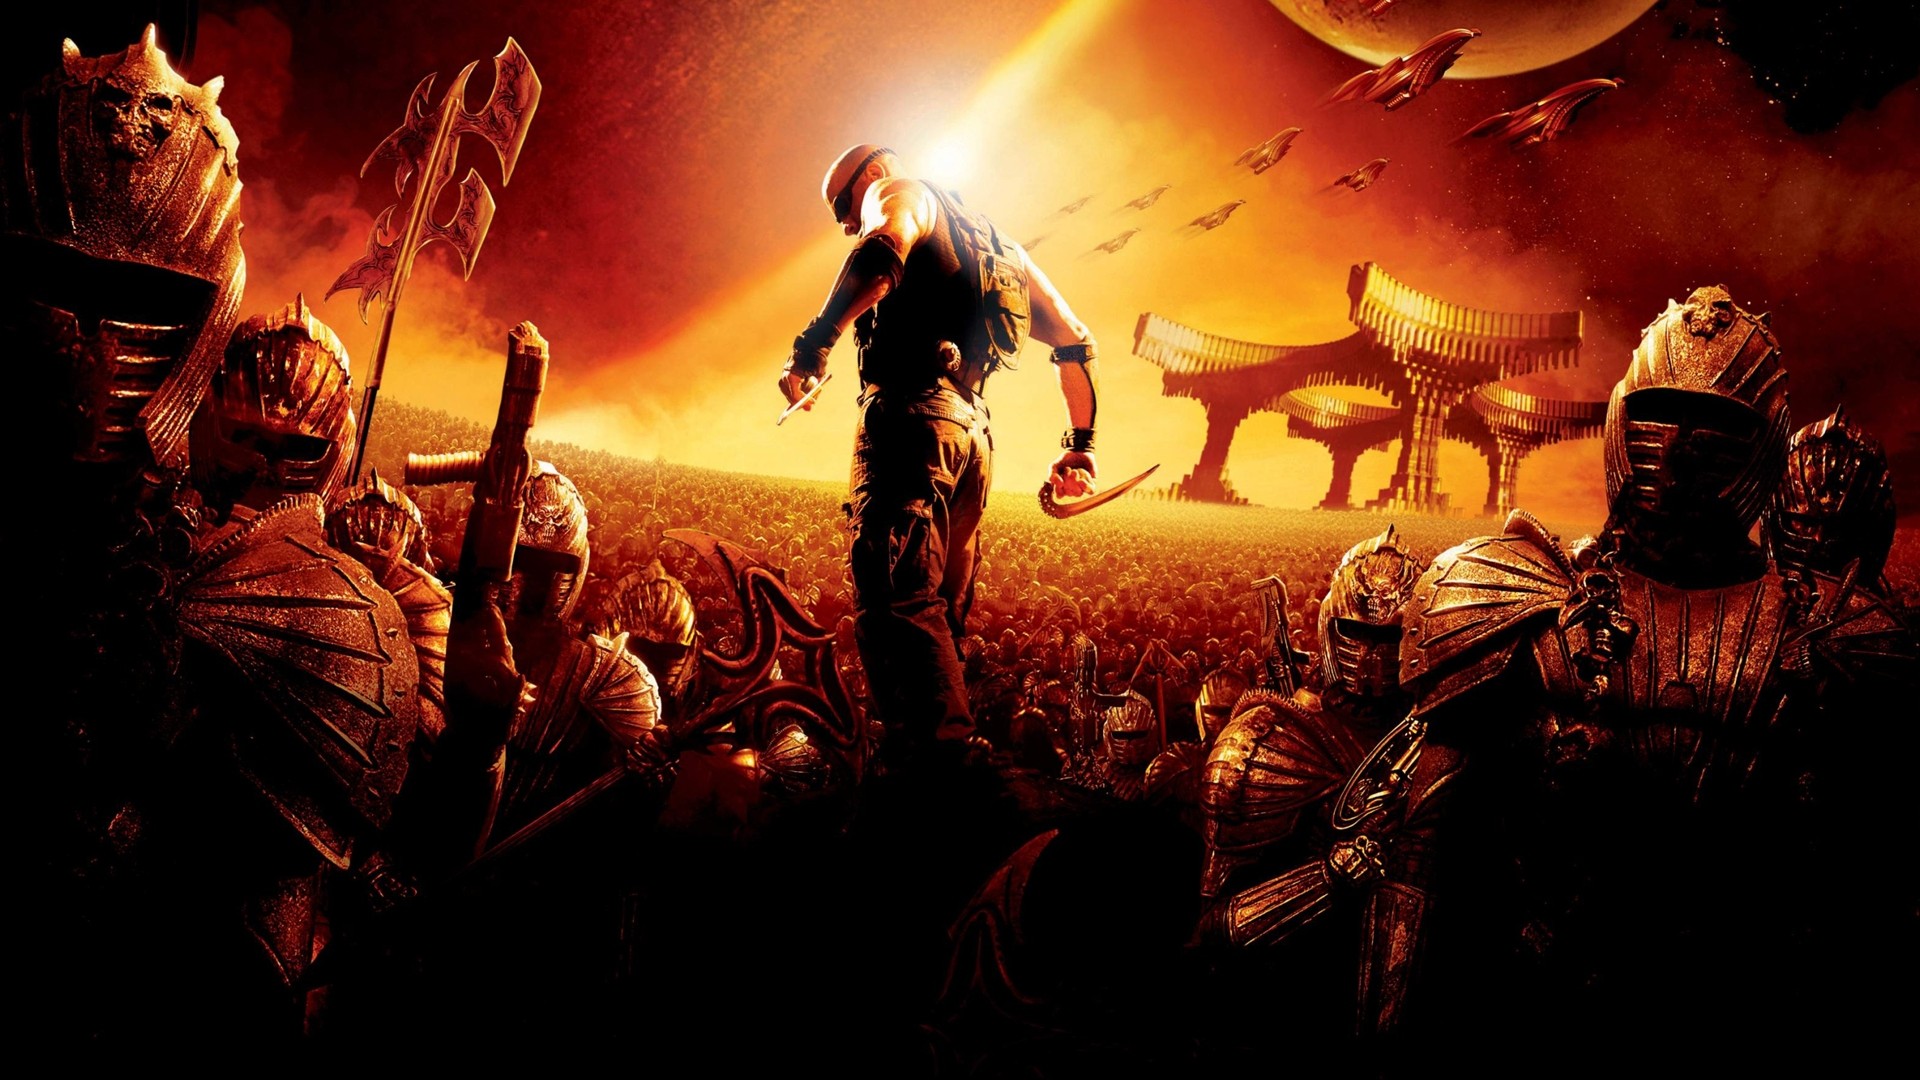 soldiers, outer space, movies, riddick, The Chronicles of Riddick, Vin Diesel - desktop wallpaper